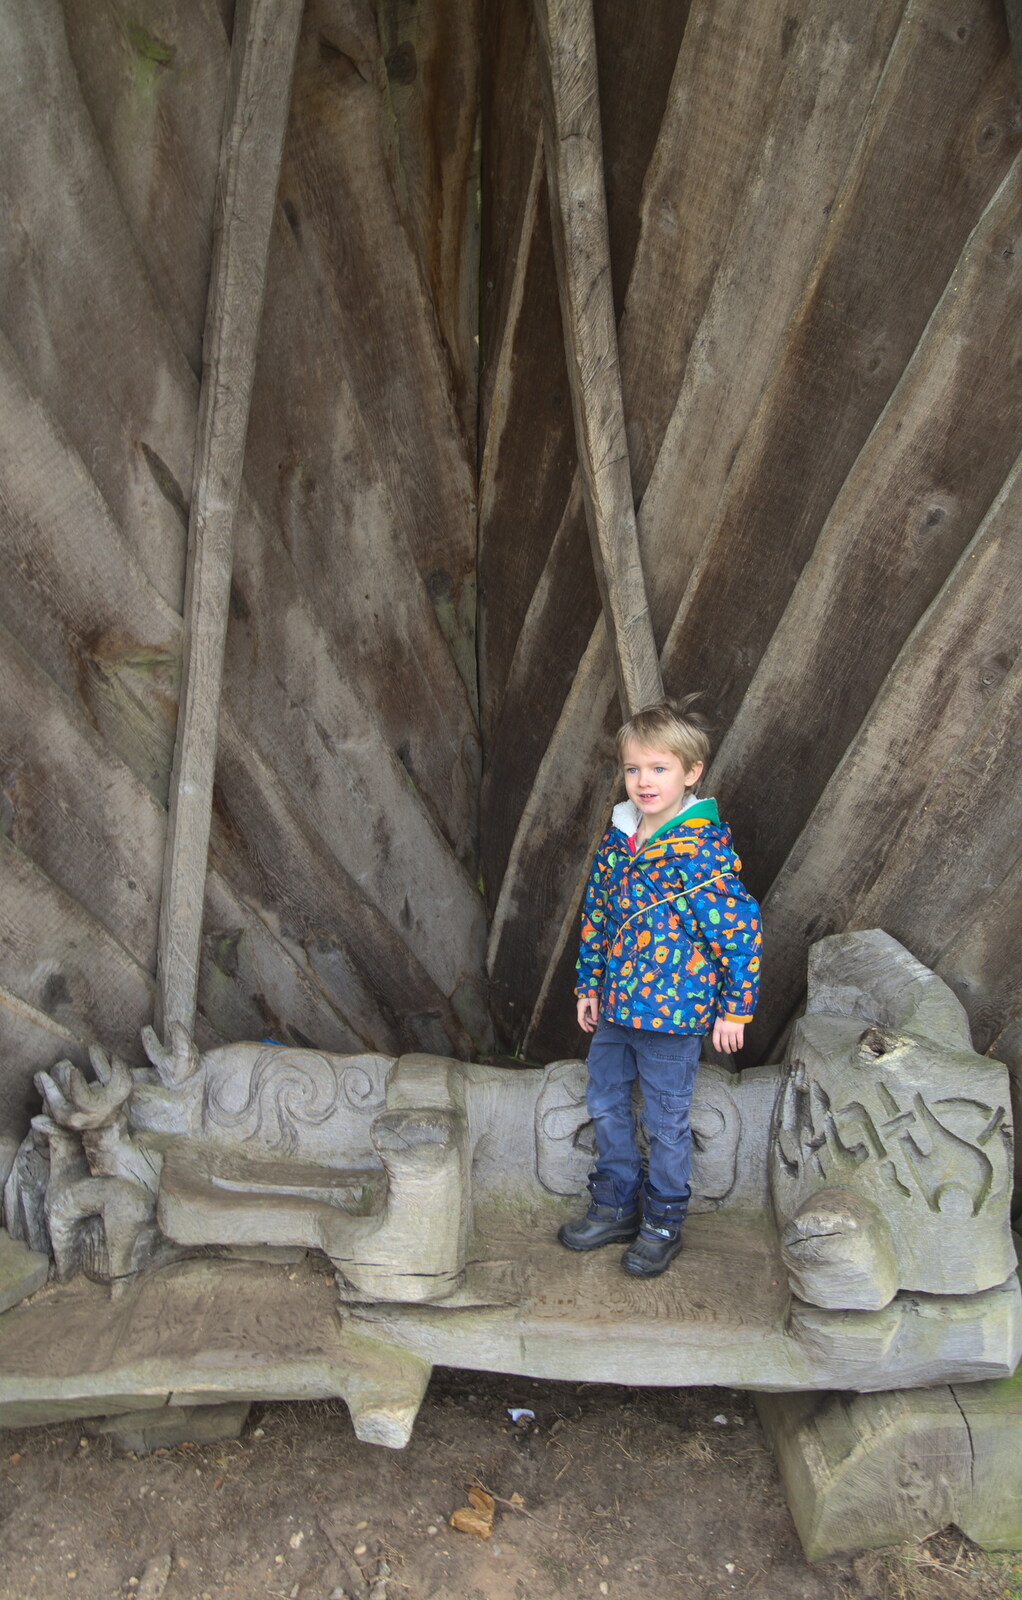 Harry stands on a seat covered up with half a boat from A Trip to Sutton Hoo, Woodbridge, Suffolk - 29th January 2017